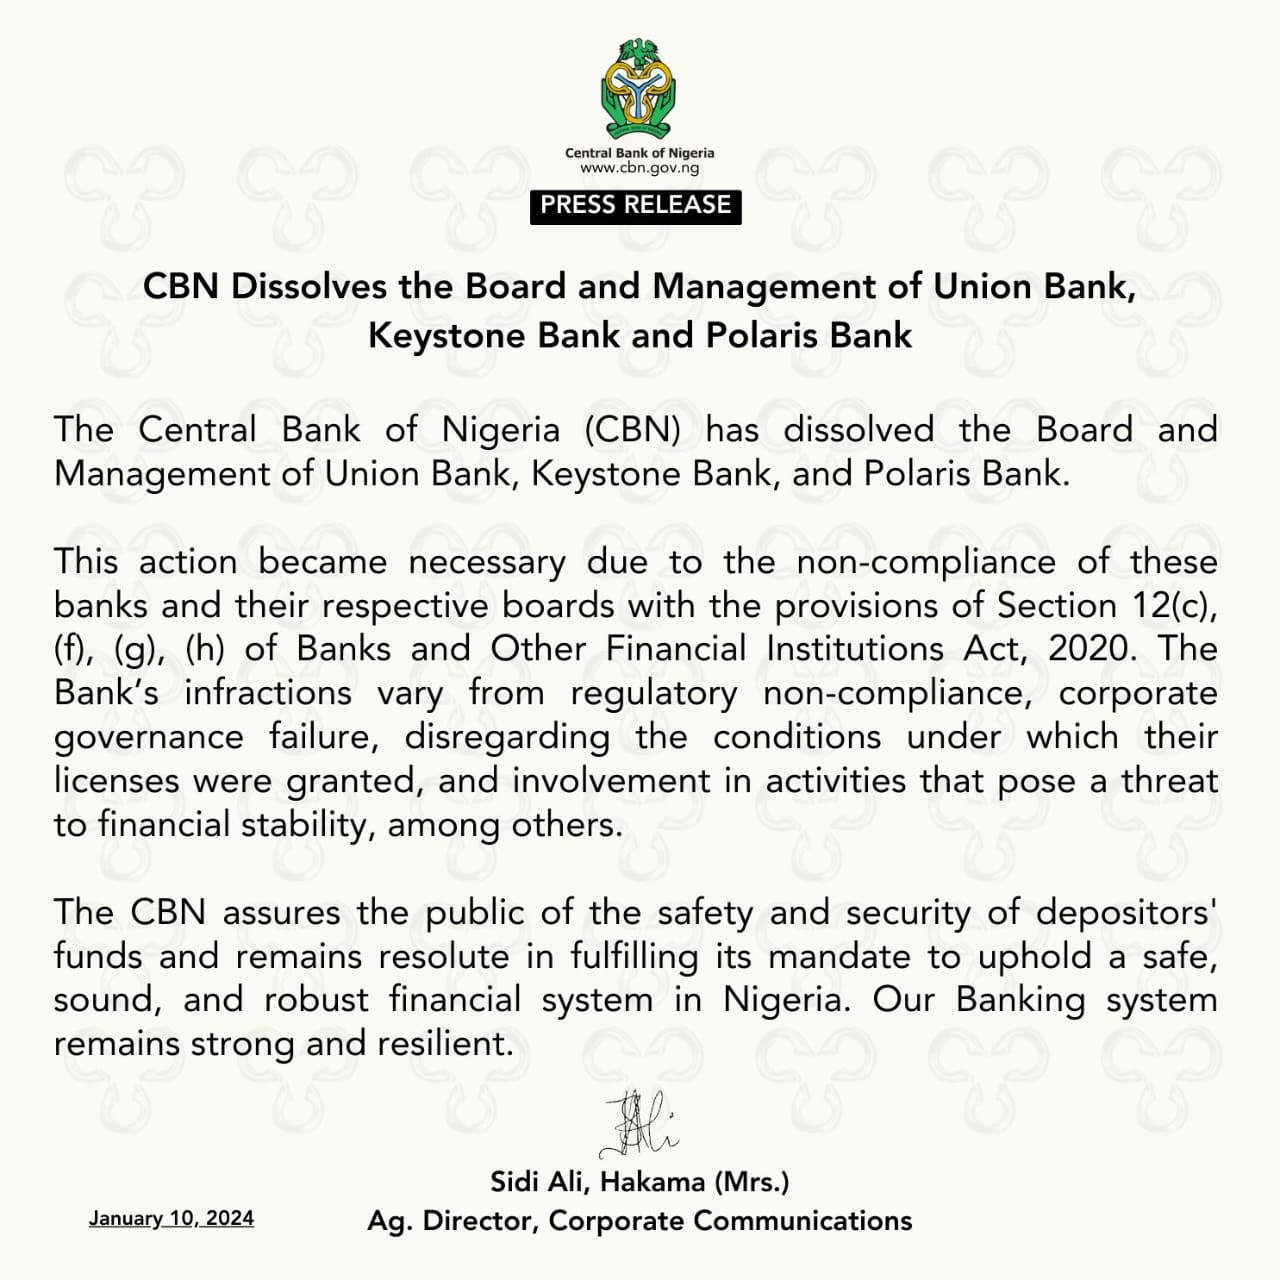 cbn dissolves boards of four banks